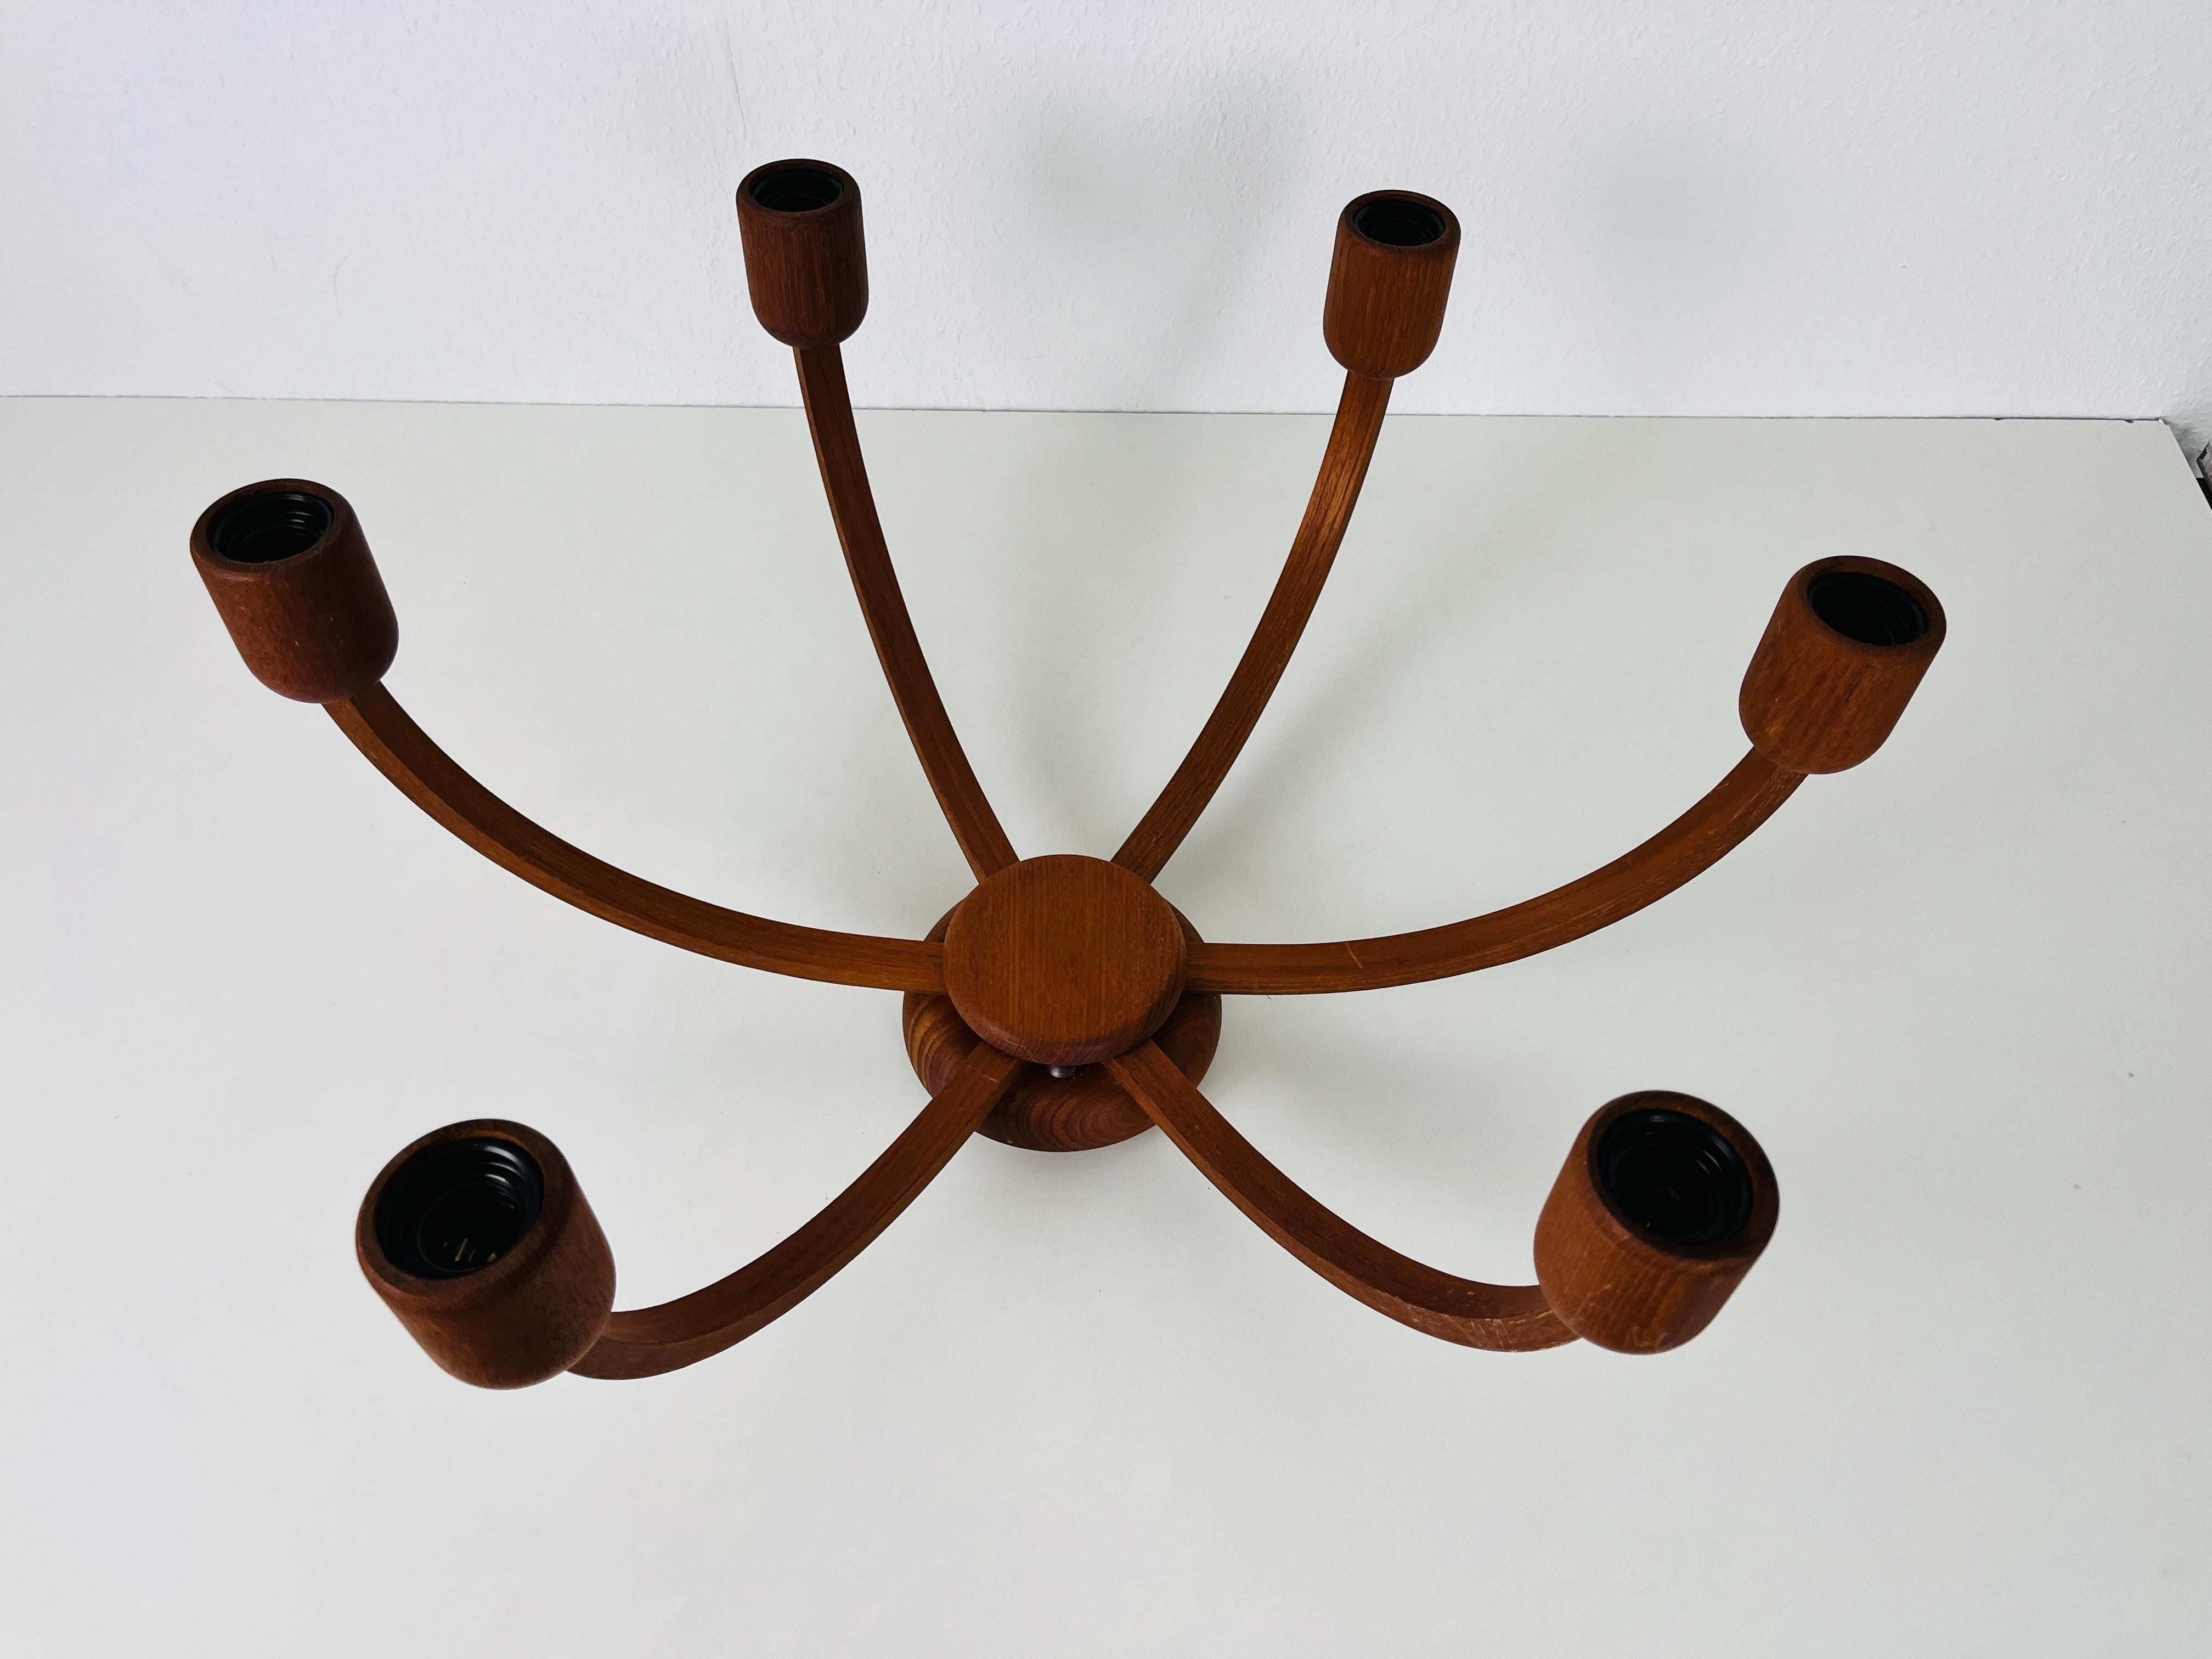 German Large Midcentury Teak Pendant Lamp with 5 Arms by Domus, 1960s